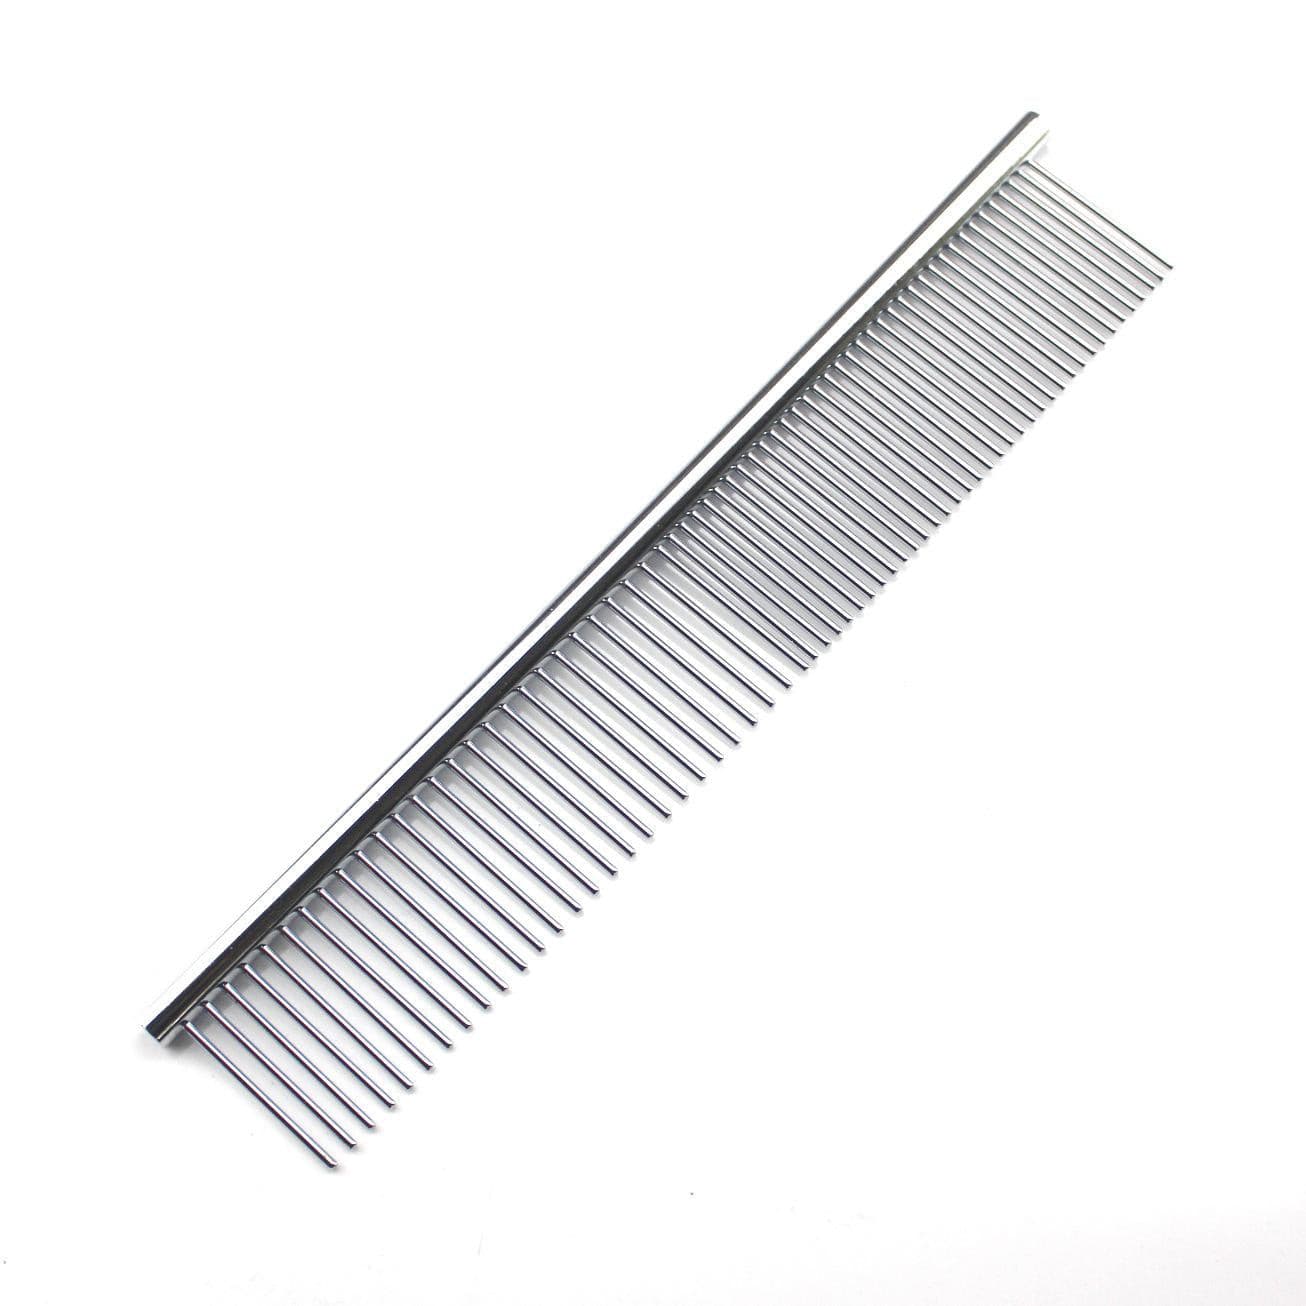 Stainless Steel Medium Pet Comb | Works well with hair mats | Keeps your pet well groomed.